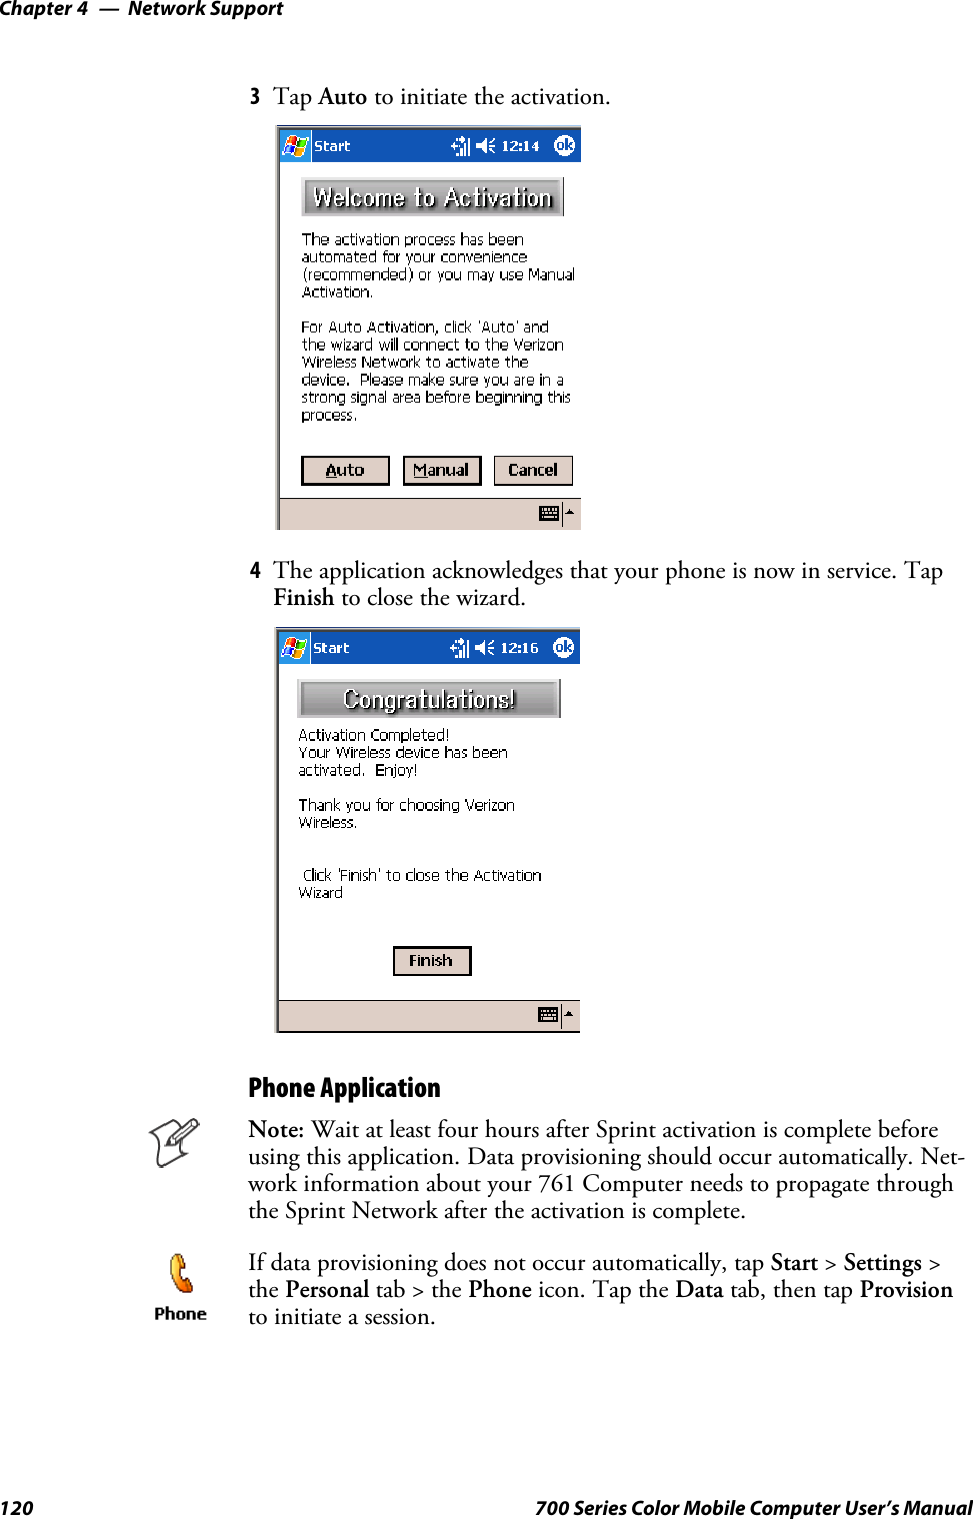 Network SupportChapter —4120 700 Series Color Mobile Computer User’s Manual3Tap Auto to initiate the activation.4The application acknowledges that your phone is now in service. TapFinish to close the wizard.Phone ApplicationNote: Wait at least four hours after Sprint activation is complete beforeusing this application. Data provisioning should occur automatically. Net-work information about your 761 Computer needs to propagate throughthe Sprint Network after the activation is complete.If data provisioning does not occur automatically, tap Start &gt;Settings &gt;the Personal tab&gt;thePhone icon. Tap the Data tab, then tap Provisionto initiate a session.